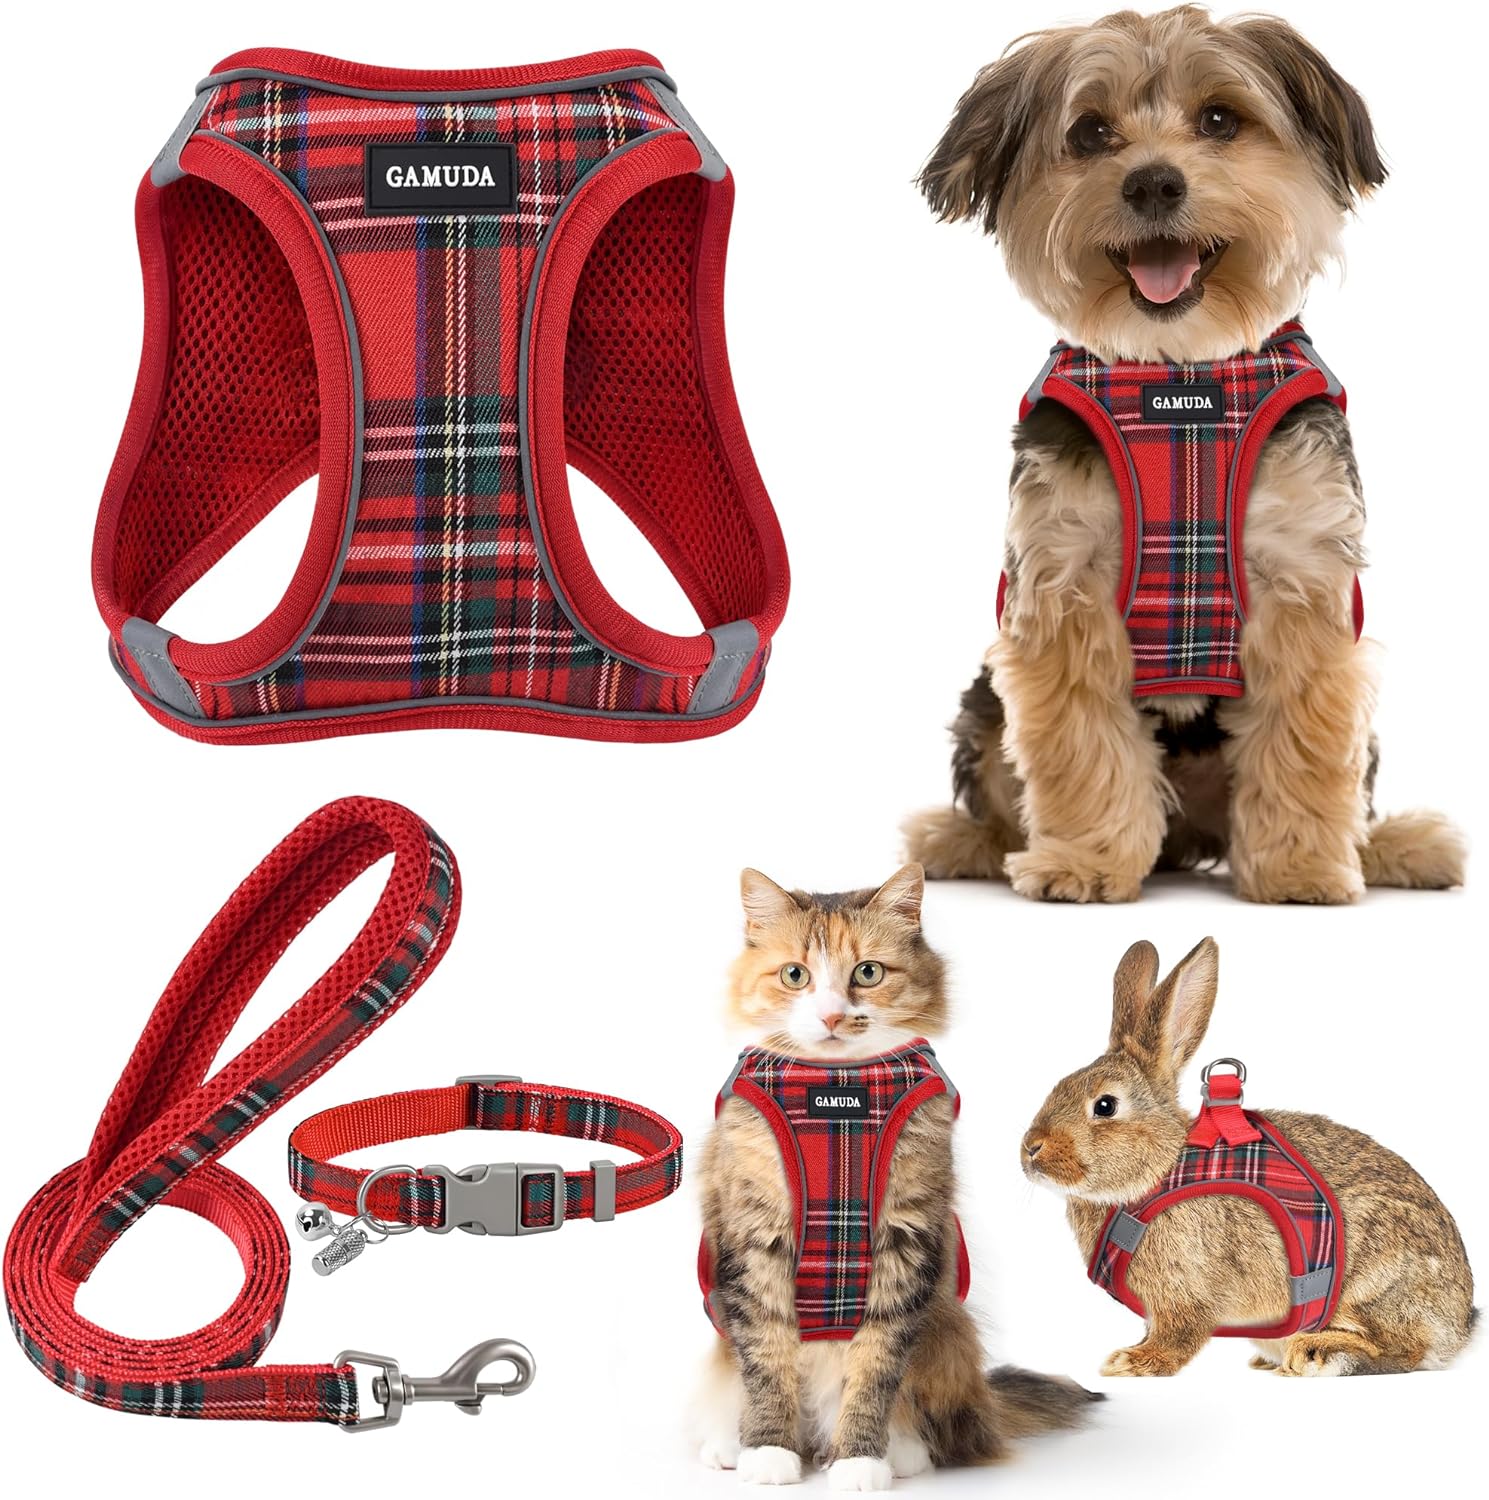 GAMUDA Small Pet Harness Collar and Leash Set, Step in No Chock No Pull Soft Mesh Adjustable Dog Vest Harnesses Plaid Reflective for Dogs Puppy Cats Kitten Rabbit (Red, XS)